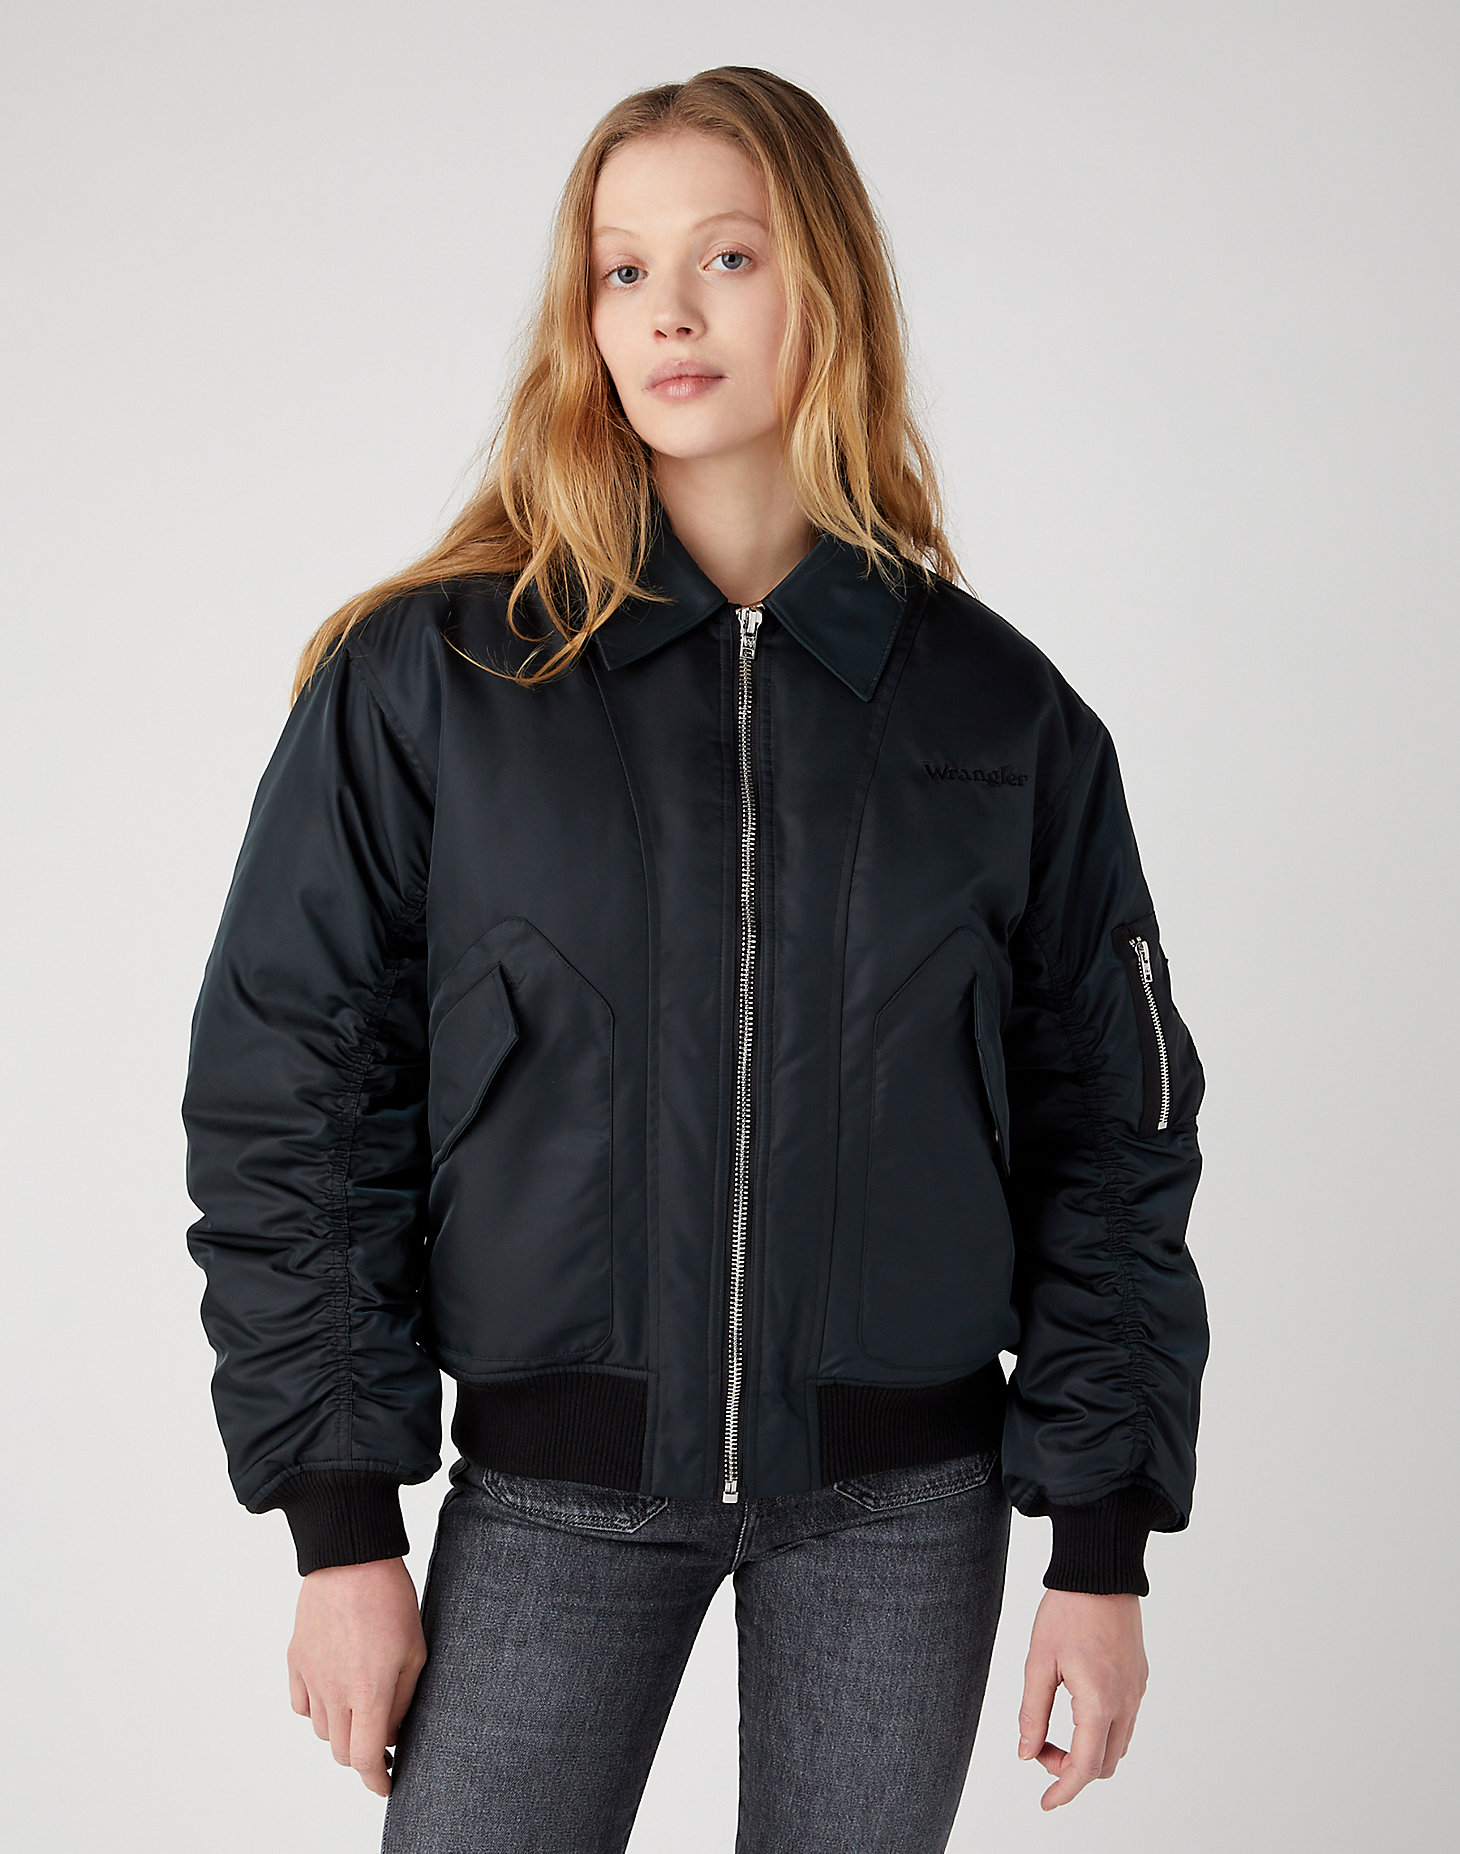 Bomber Jacket in Black main view